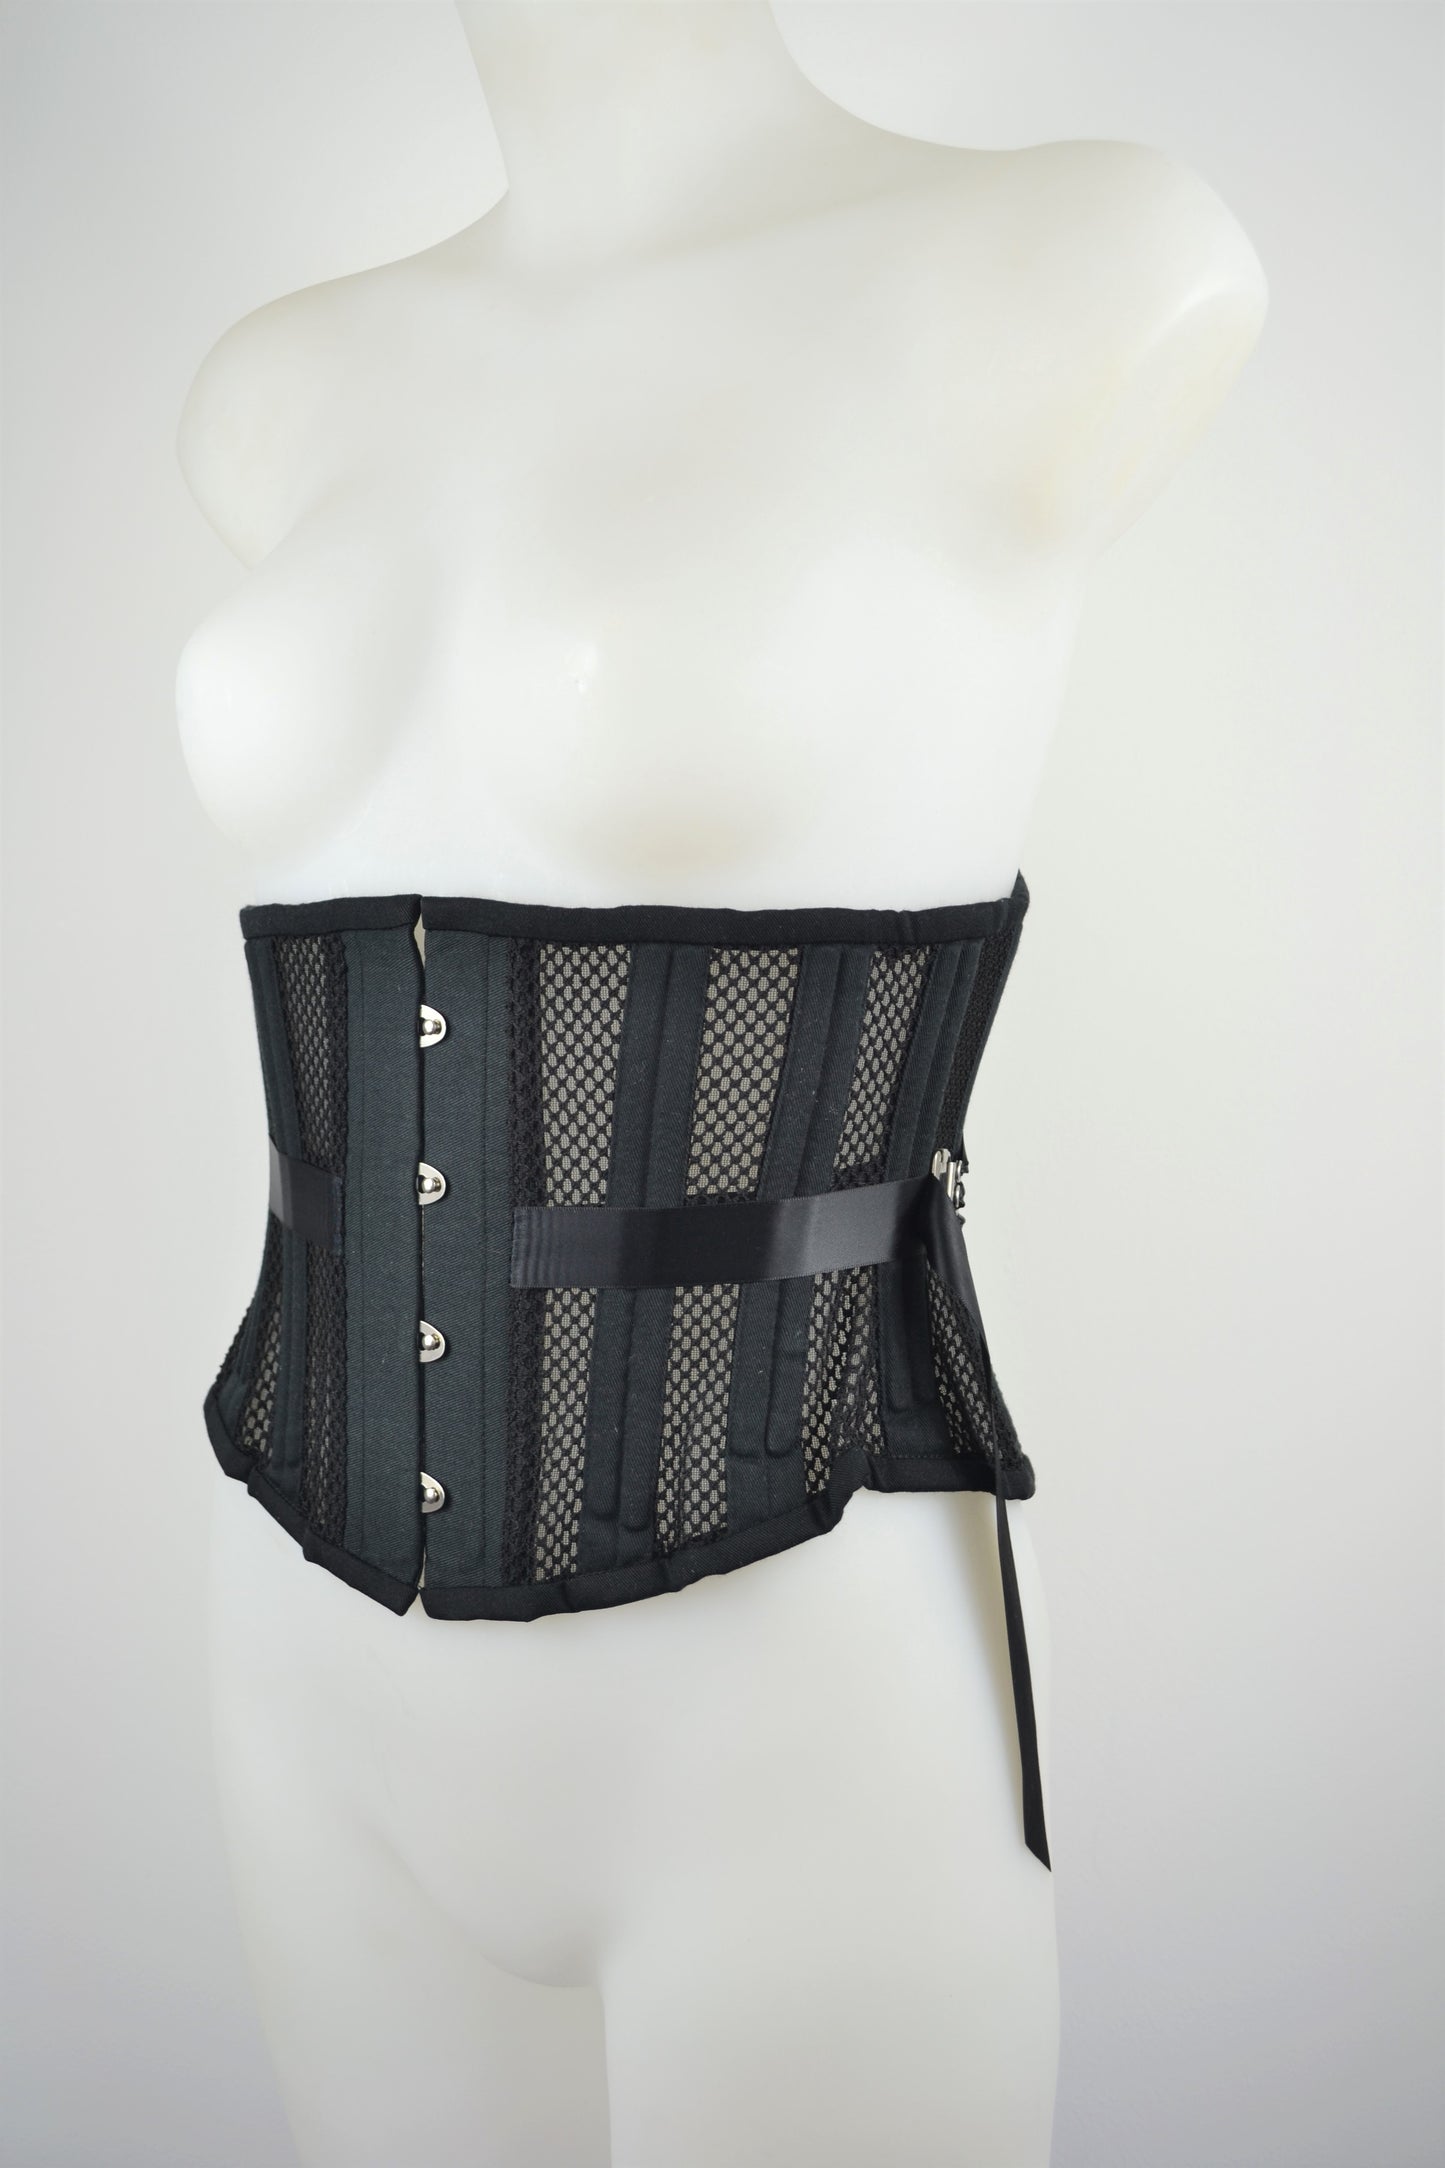 fan lace corset plus size underbust black mesh corset, retro and vintage lingerie made in the uk ethically and sustainably by pip and pantalaimon